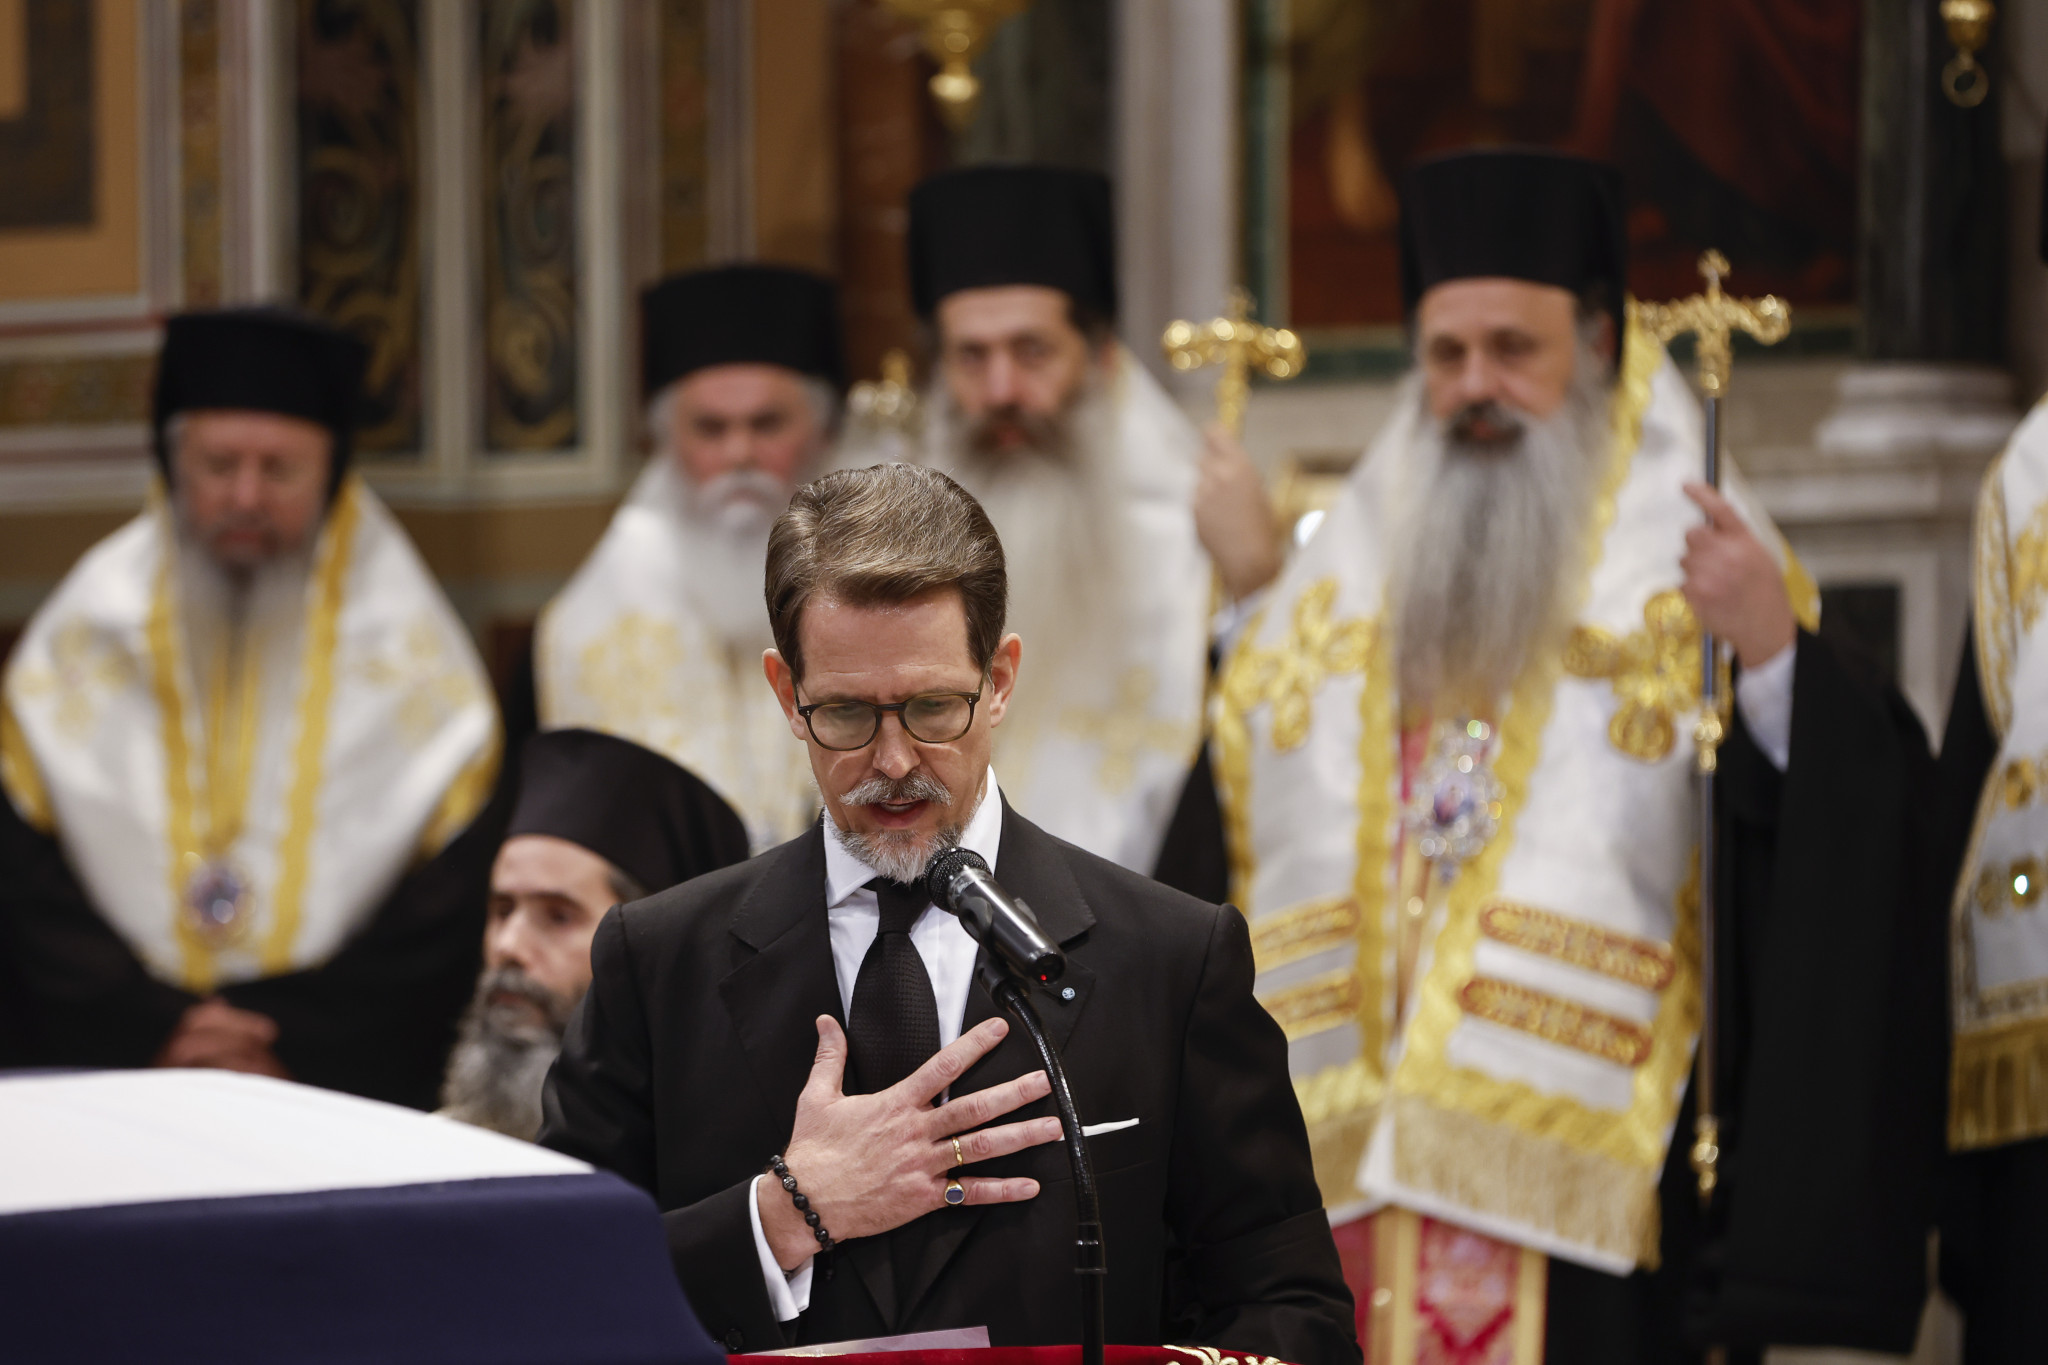 The former Crown Prince Pavlos gave an oration at the funeral of his father King Constantine in Athens ©Getty Images